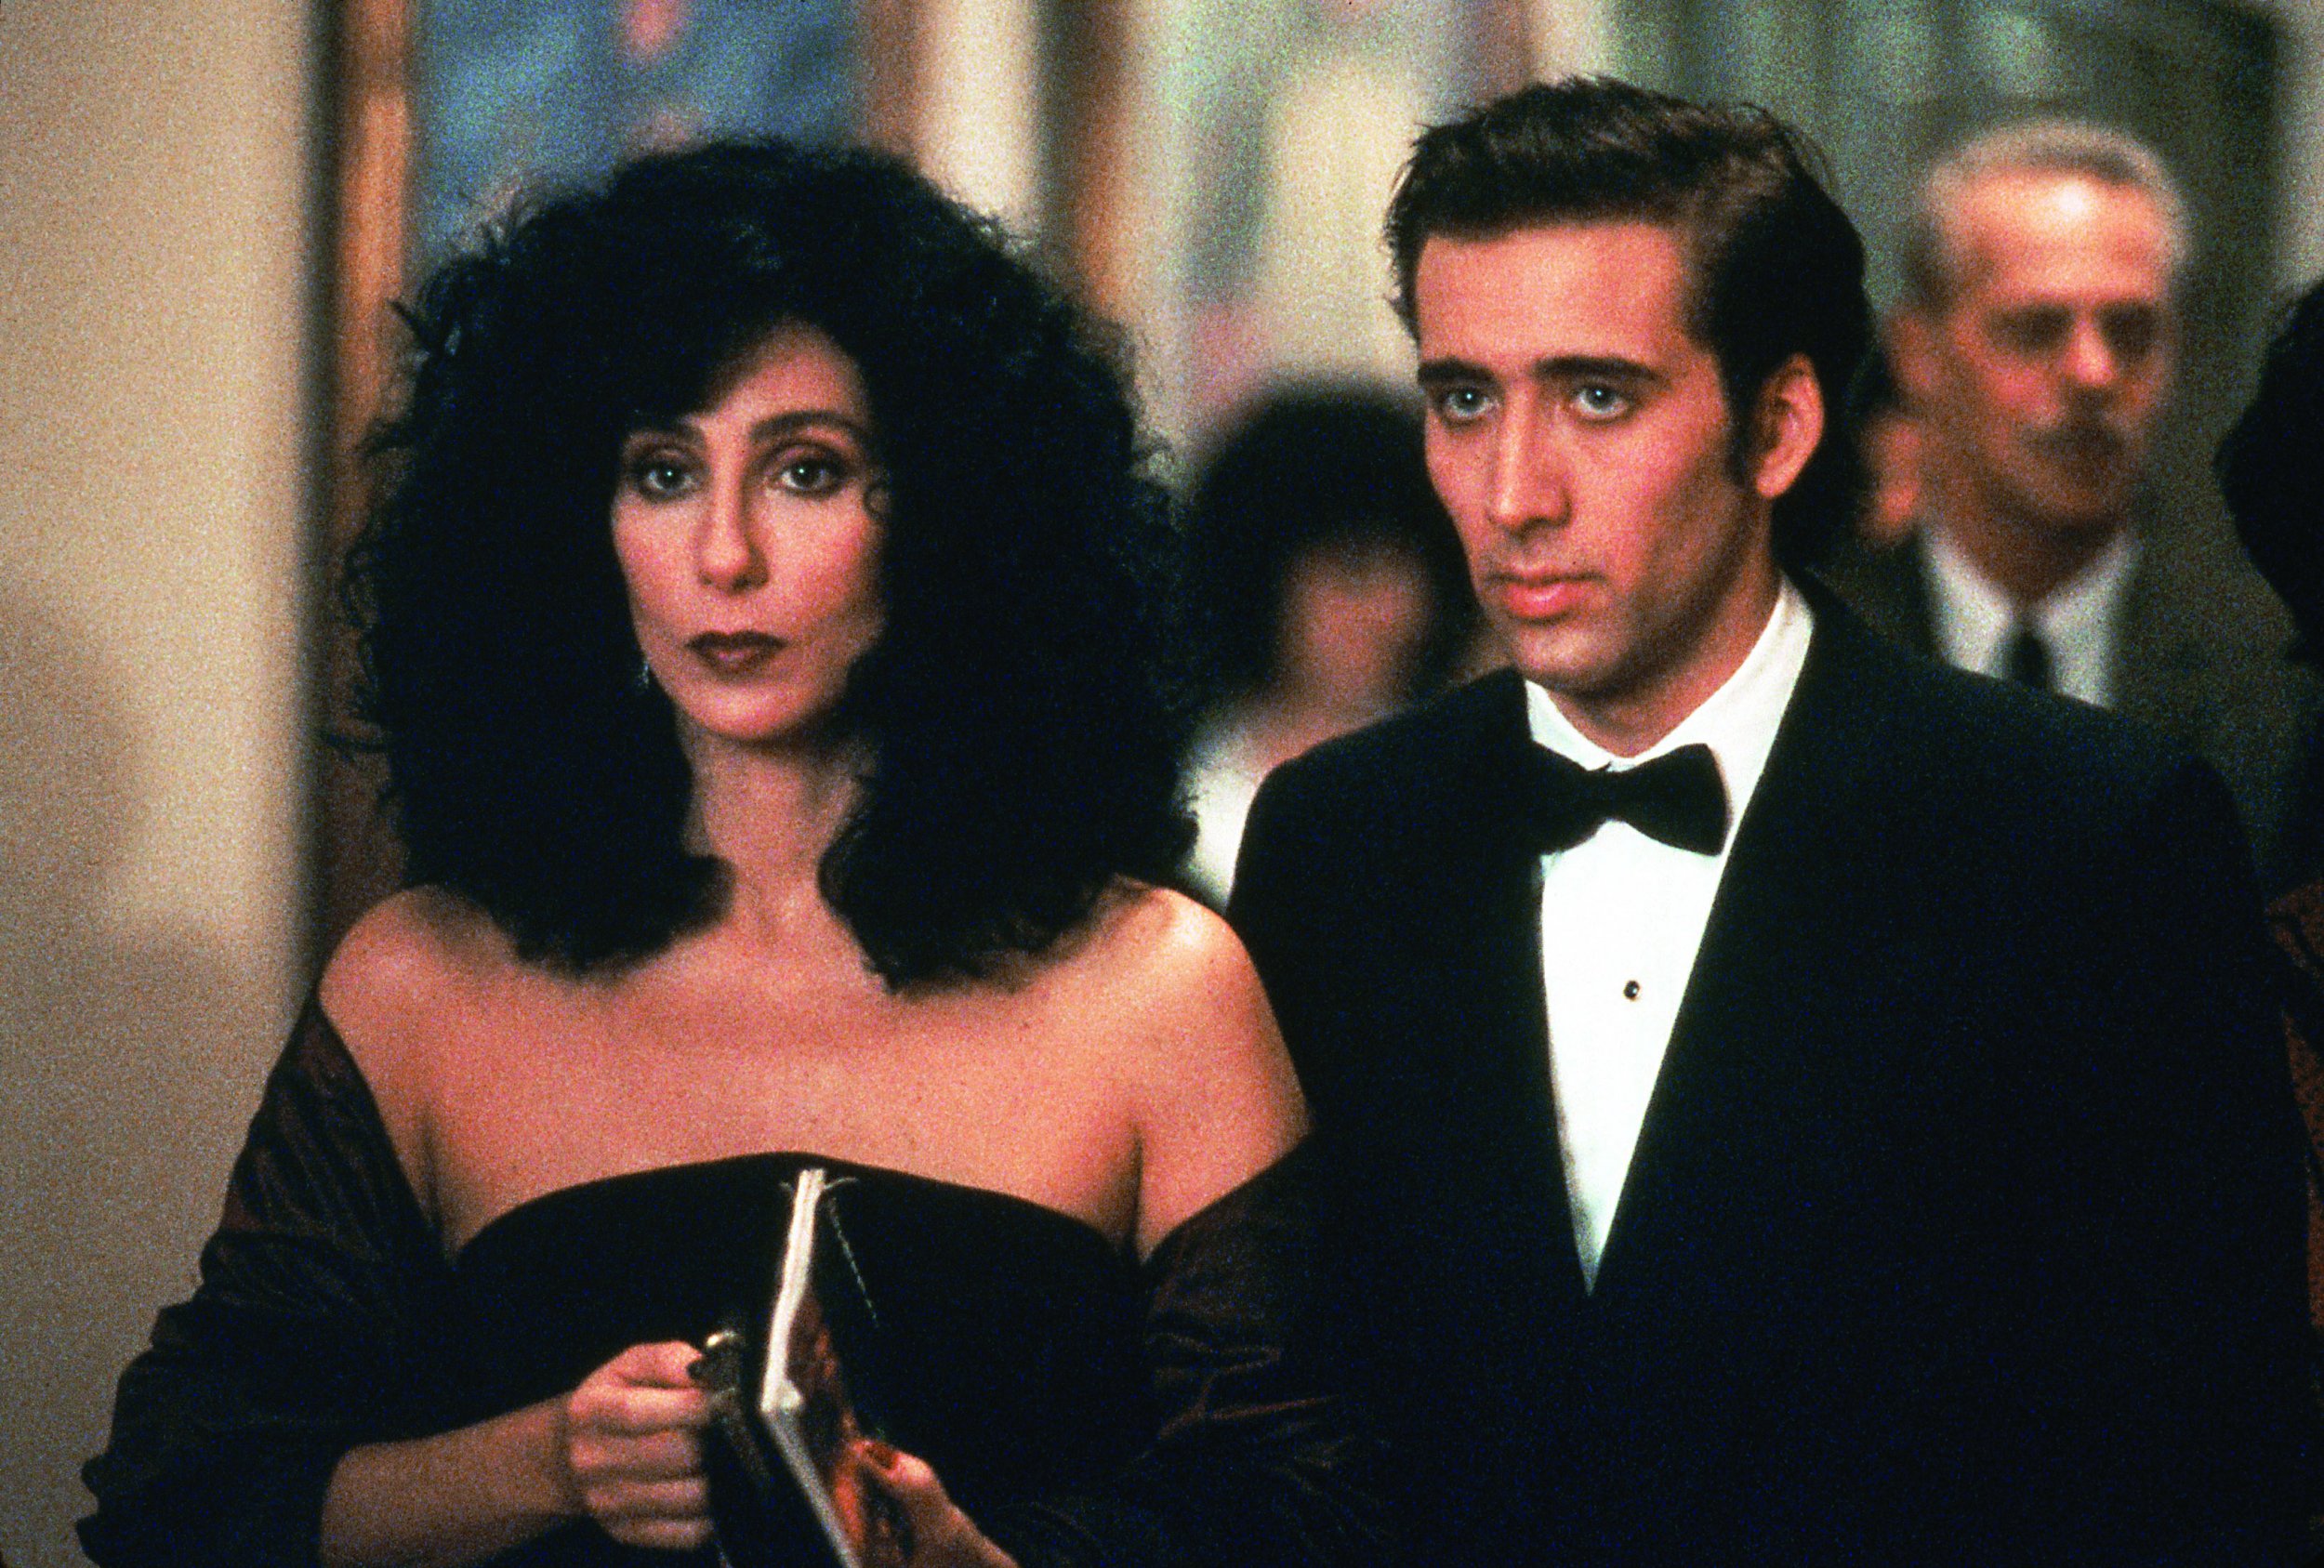 Why 1987 Was A Great Year For Movies Memorable 80s Performances By Cher Michael Douglas And Sean Connery Here are the best michael douglas movies, ranked best to worst, with movie trailers and clips. why 1987 was a great year for movies